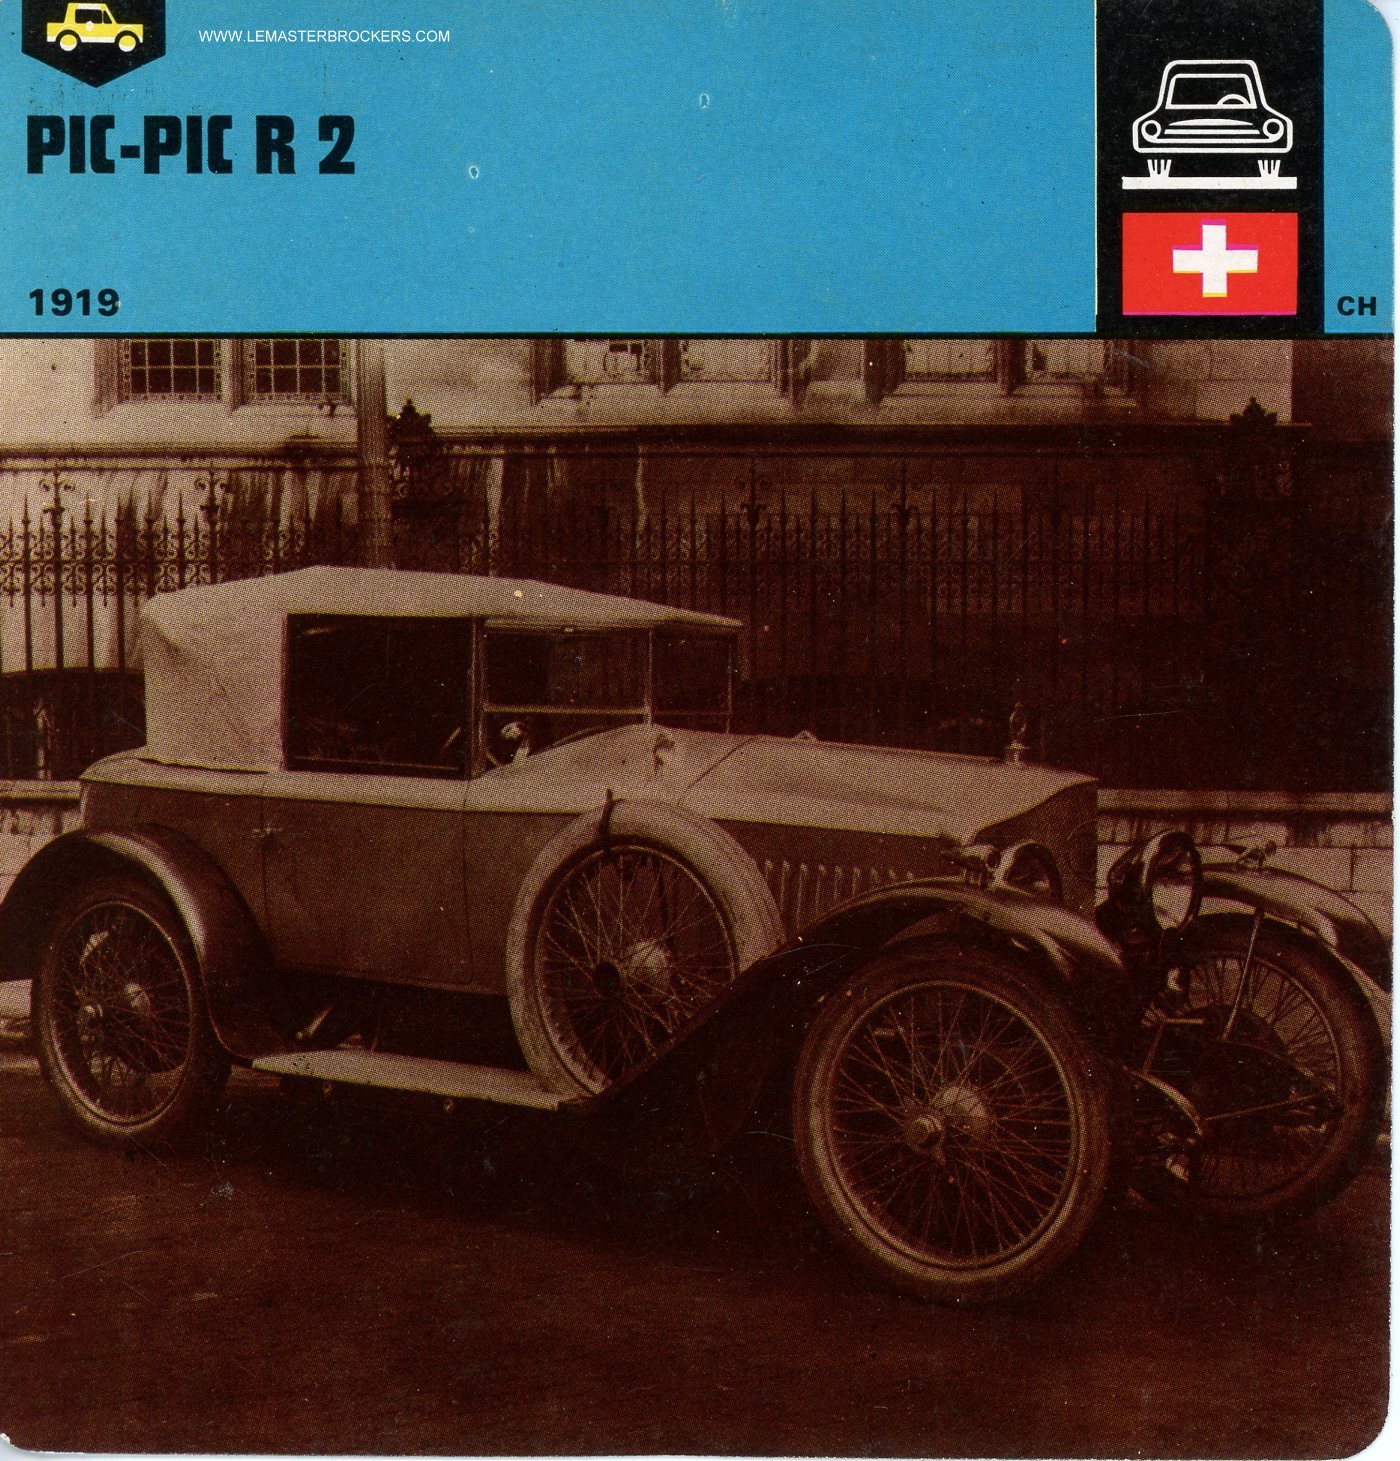 FICHE-PICPIC-R2-CARS-CARD-LEMASTERBROCKERS